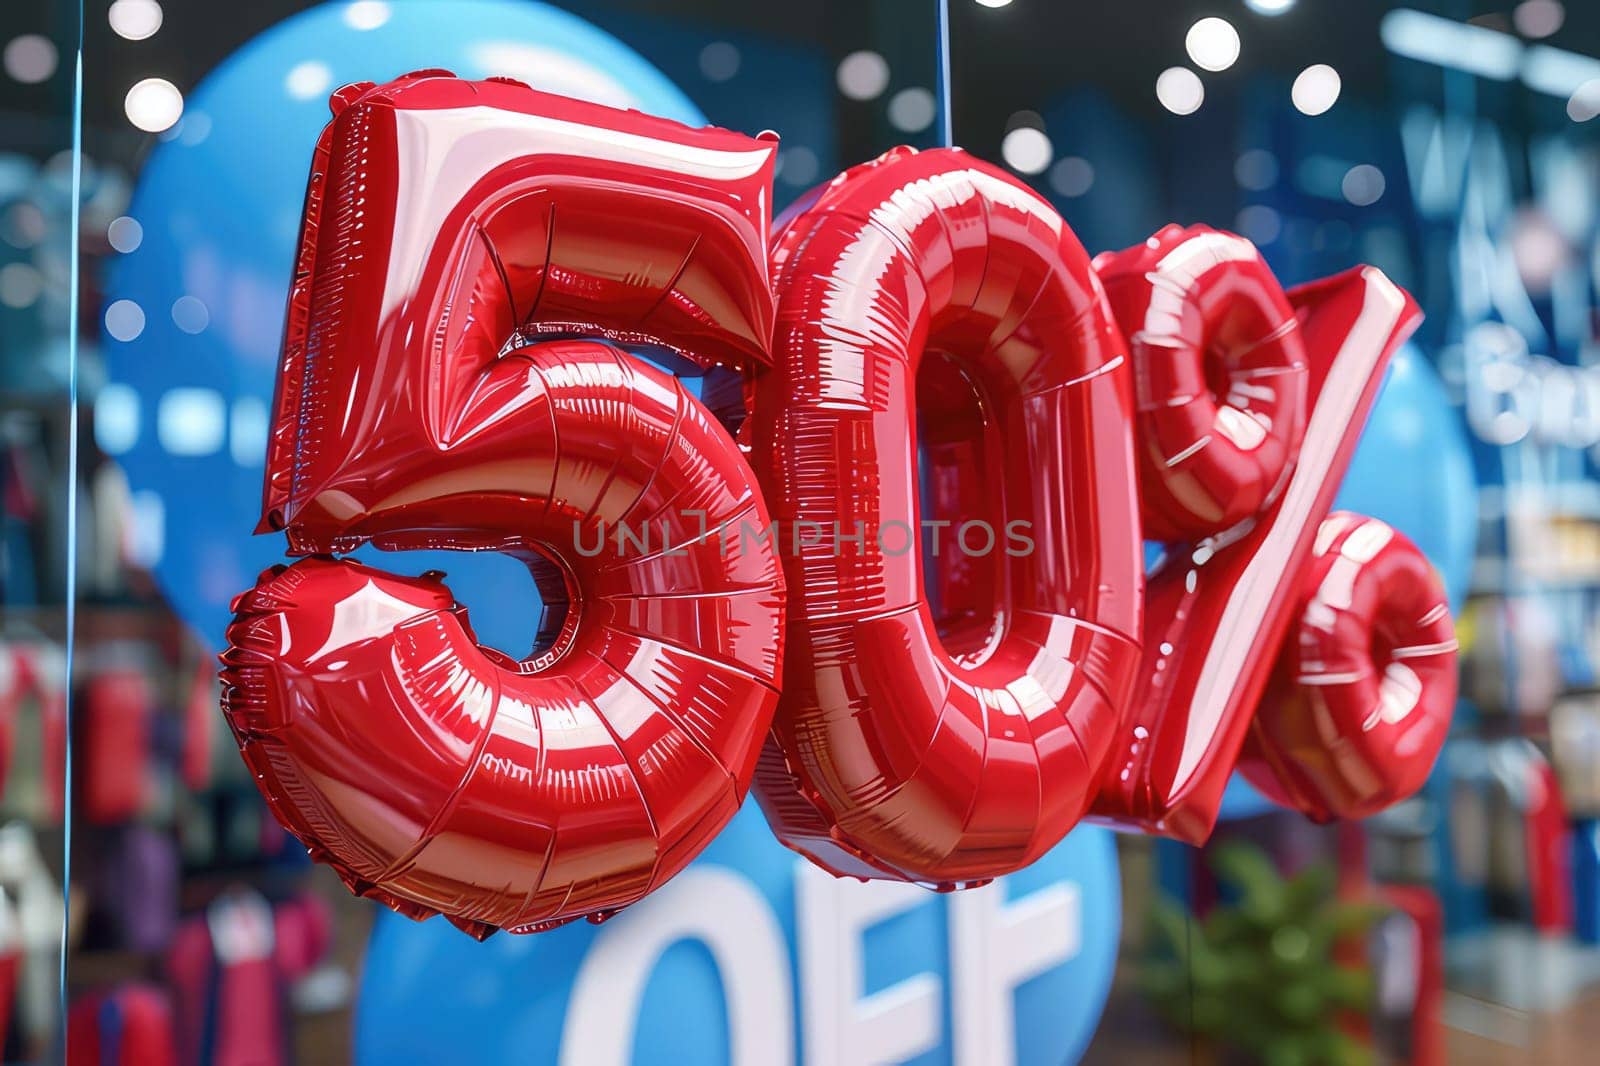 Retail Sale Promotion with Red Balloons Reading 50 Percent Off in a Shopping Mall Setting.